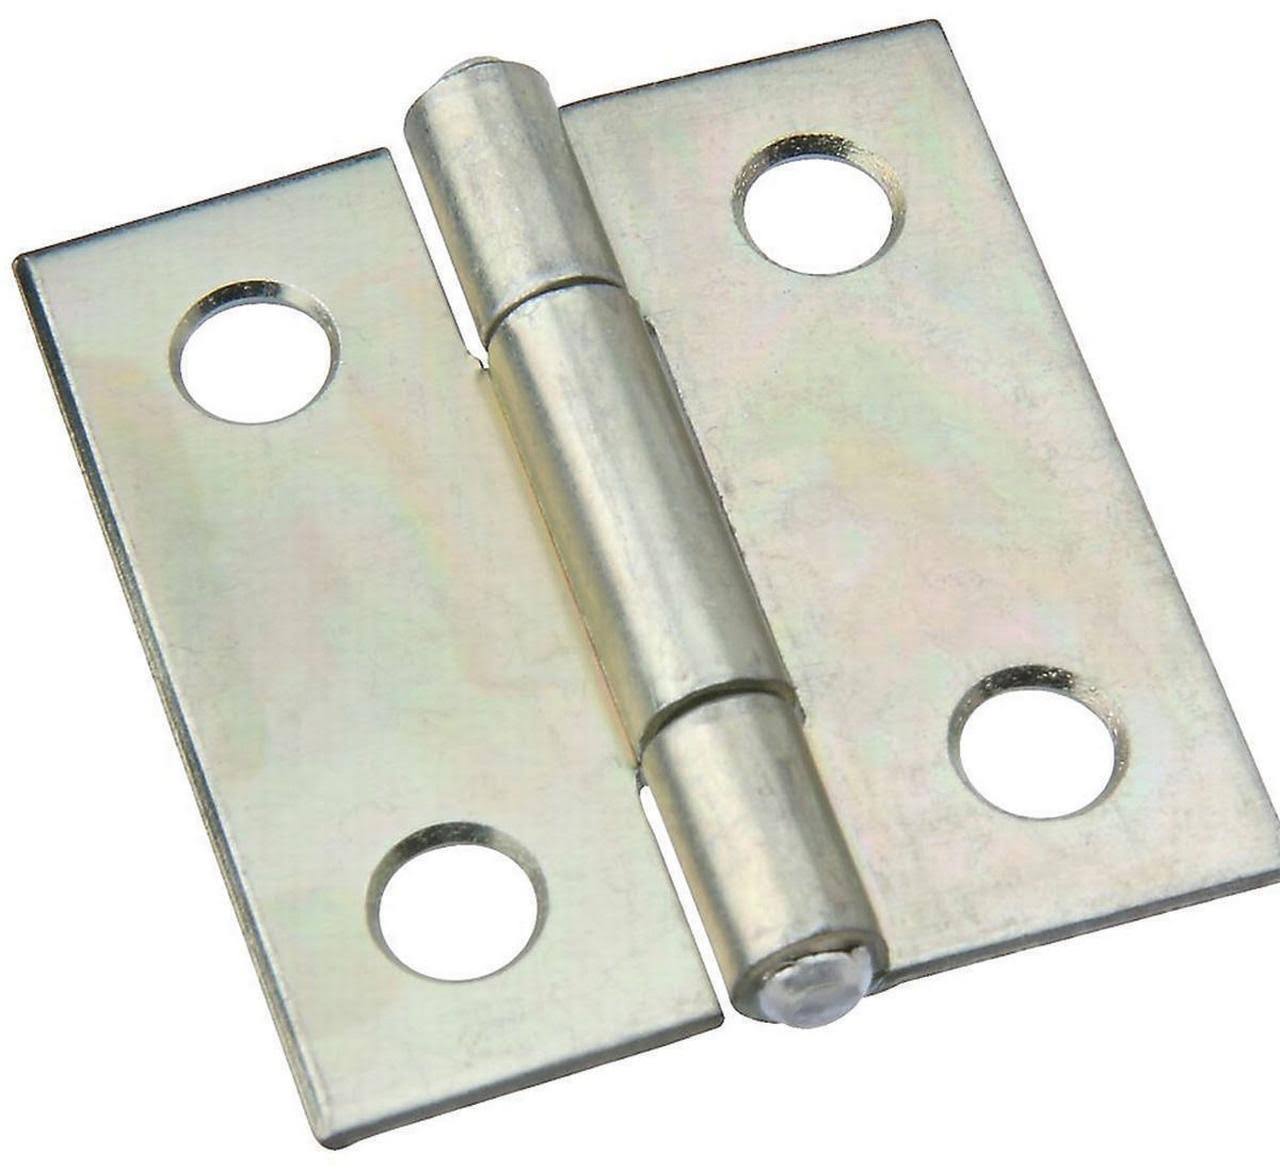 National Hardware N146-035 518 Non-Removable Pin Hinge - Zinc Plated, 1-1/2"